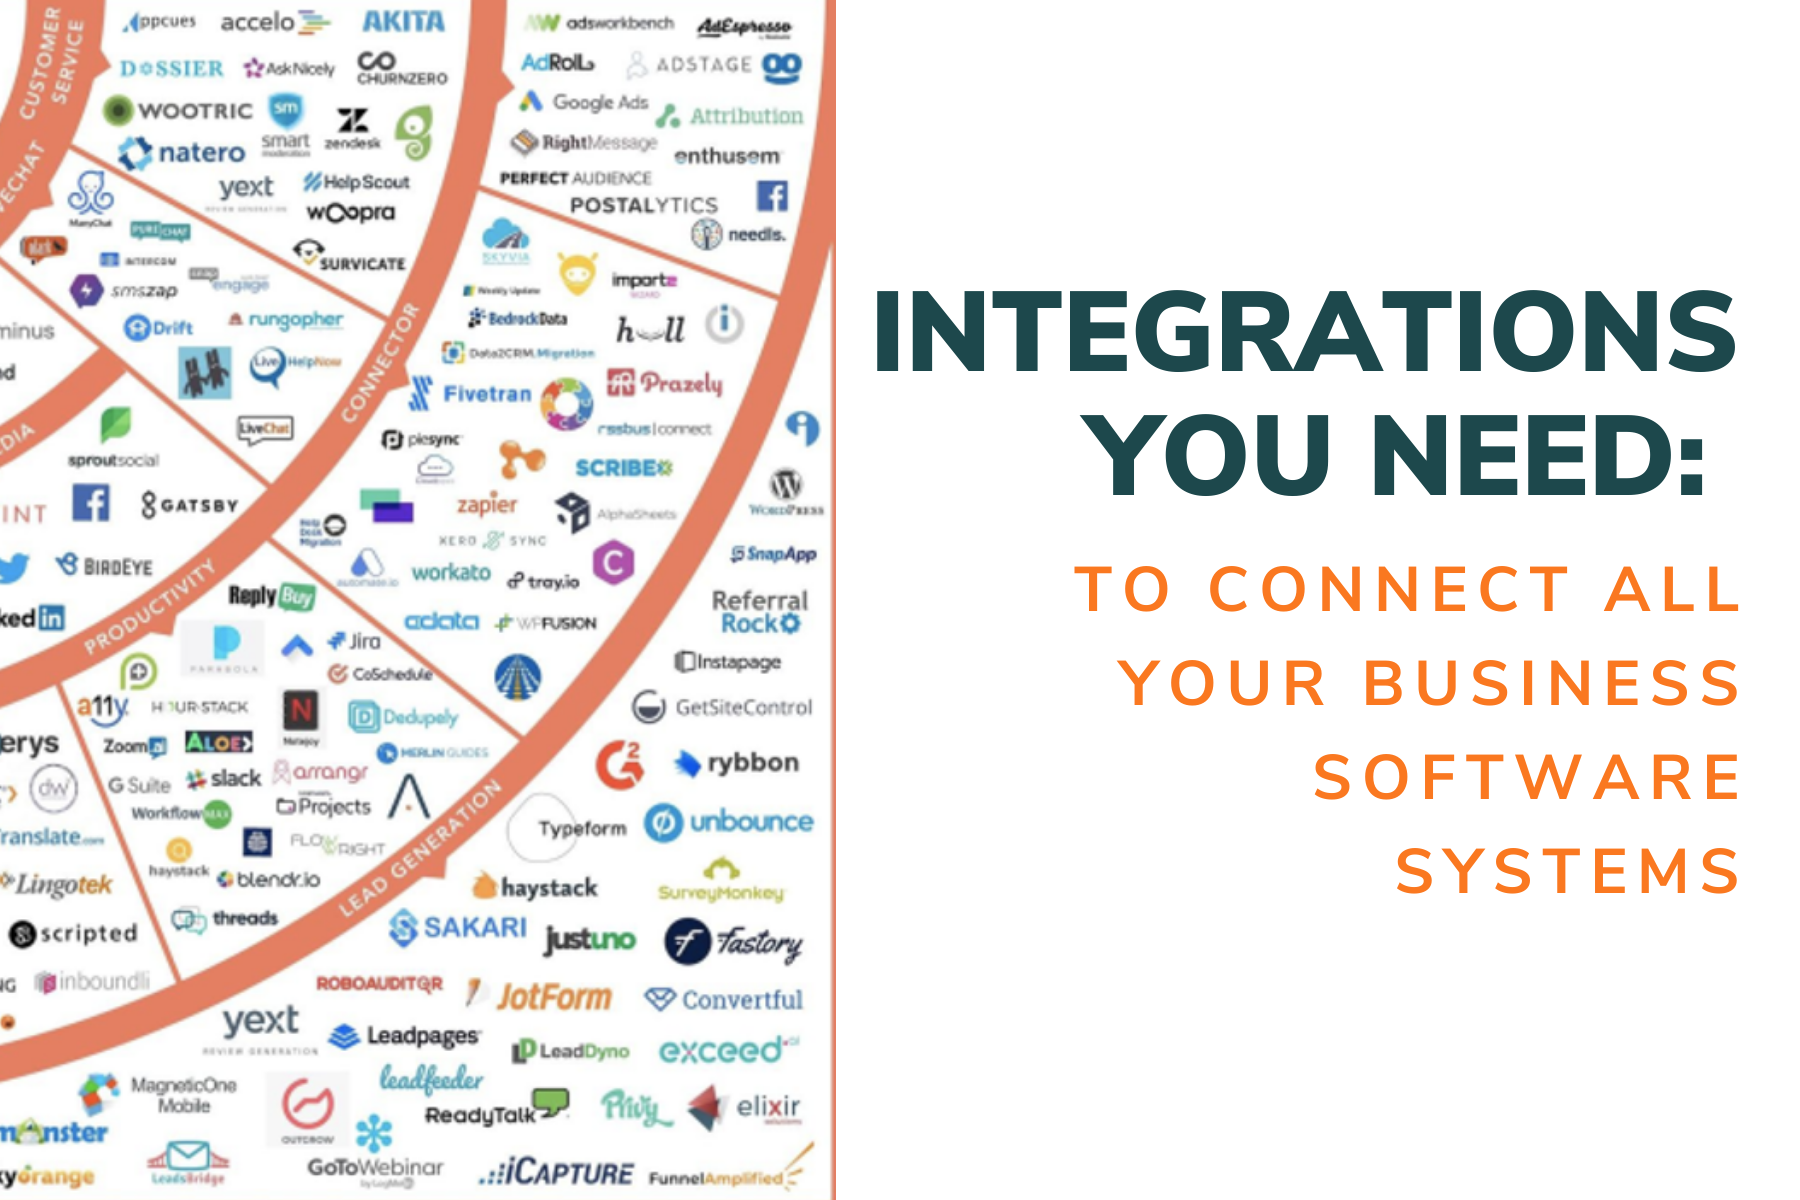 Integrations You Need: To connect all your business software systems